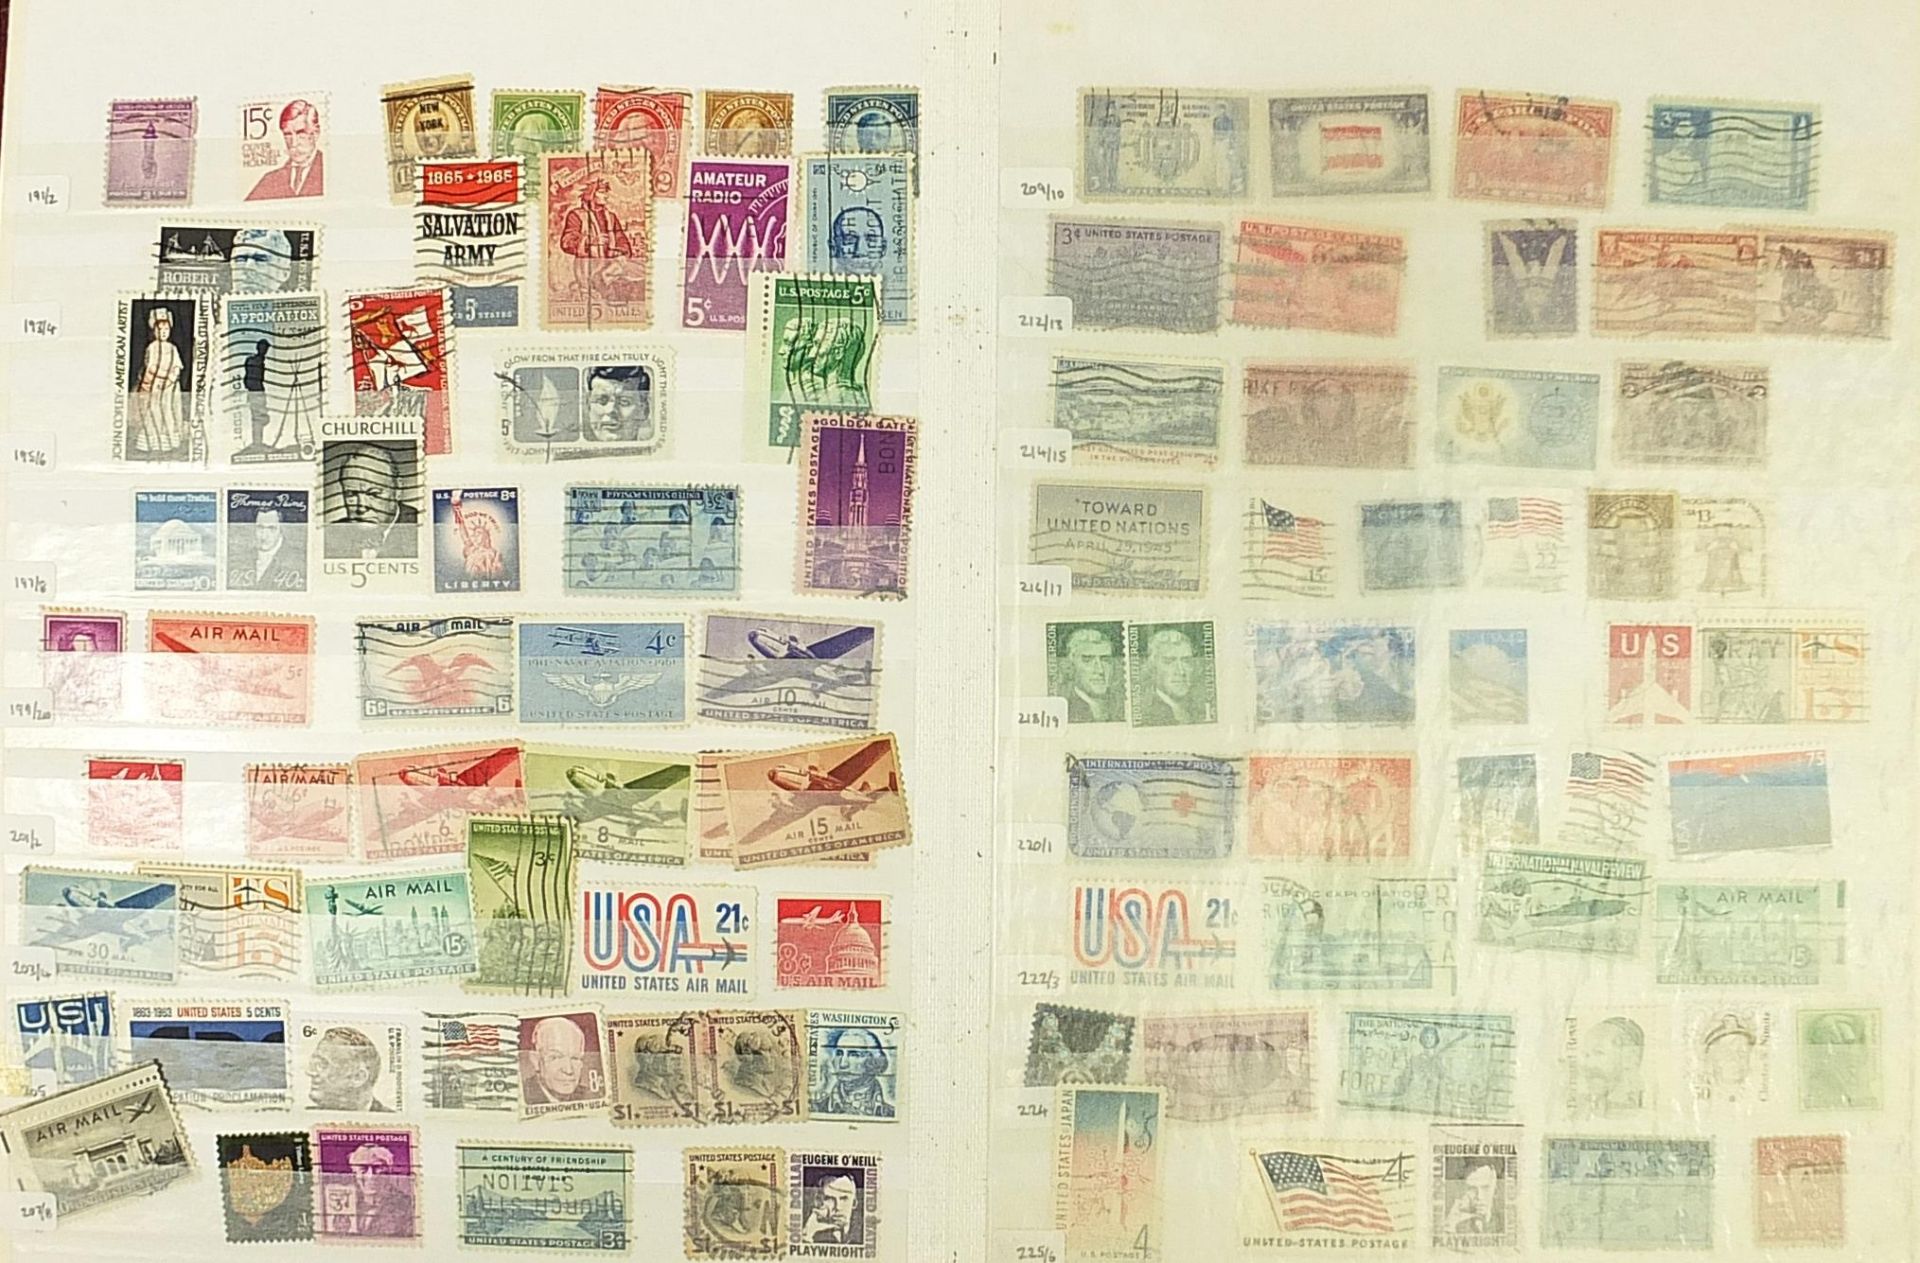 United States of America stamps arranged in an album including early Presidents